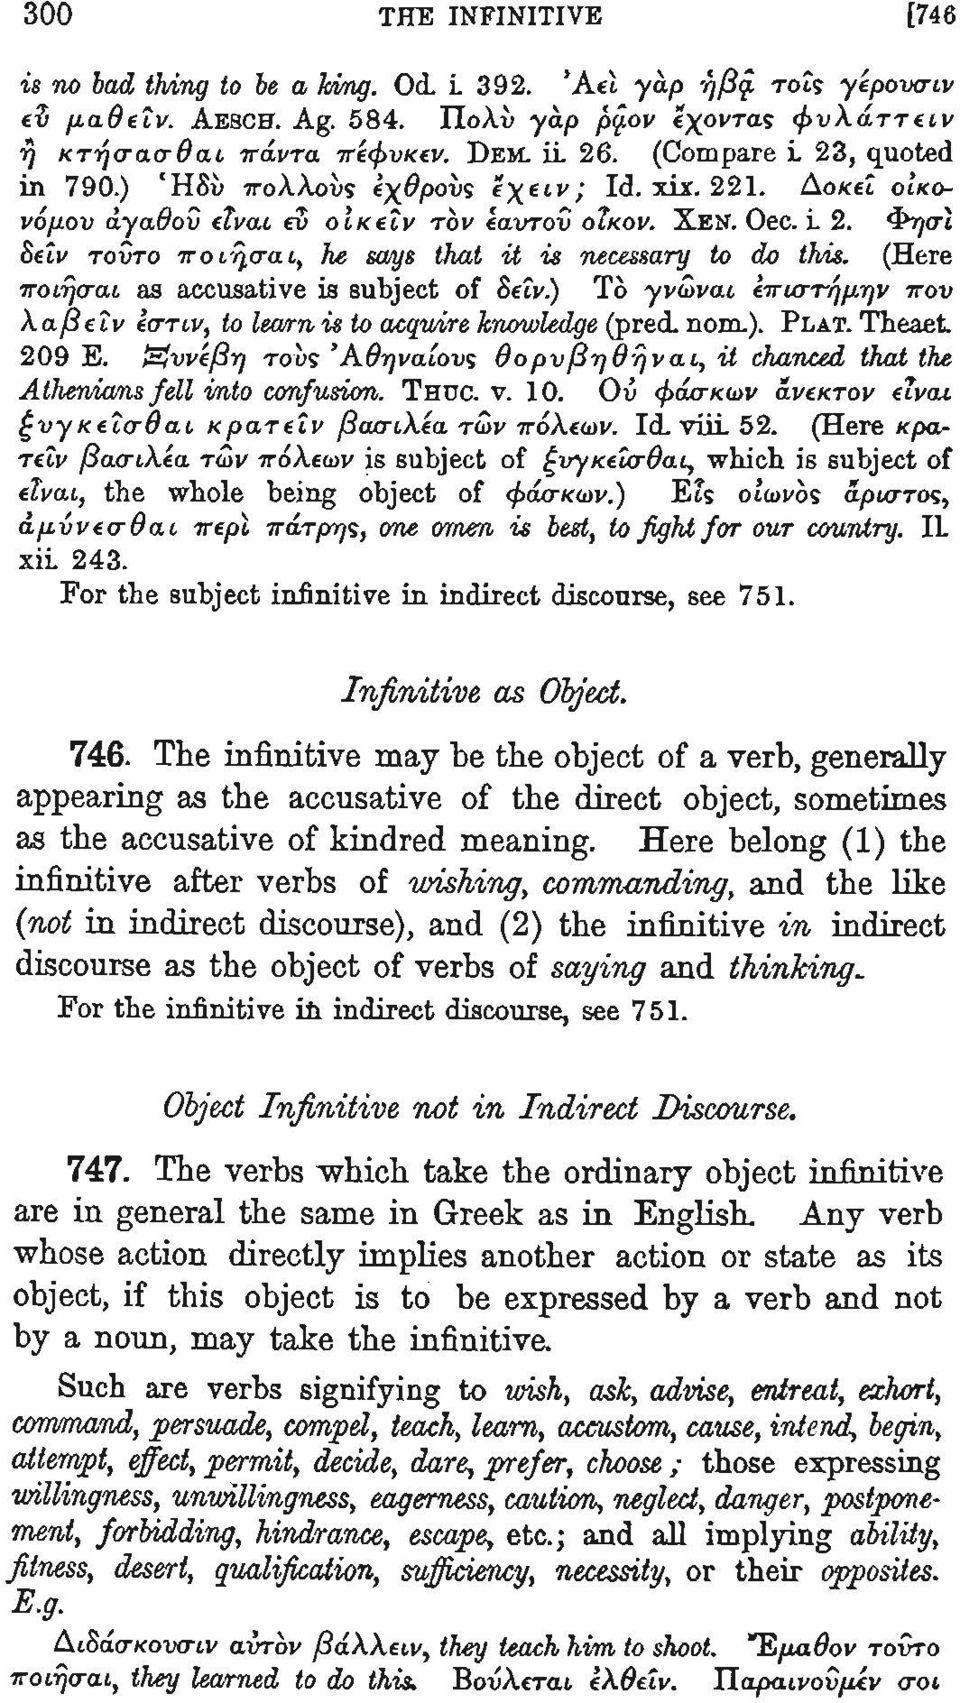 (Here αϊ as accusative is subject of δεΐν.) To γνωναι έπιστήμην που ν έστιν, to learn is to acquire knowledge (pred. nom.). PLAT. Theaet.